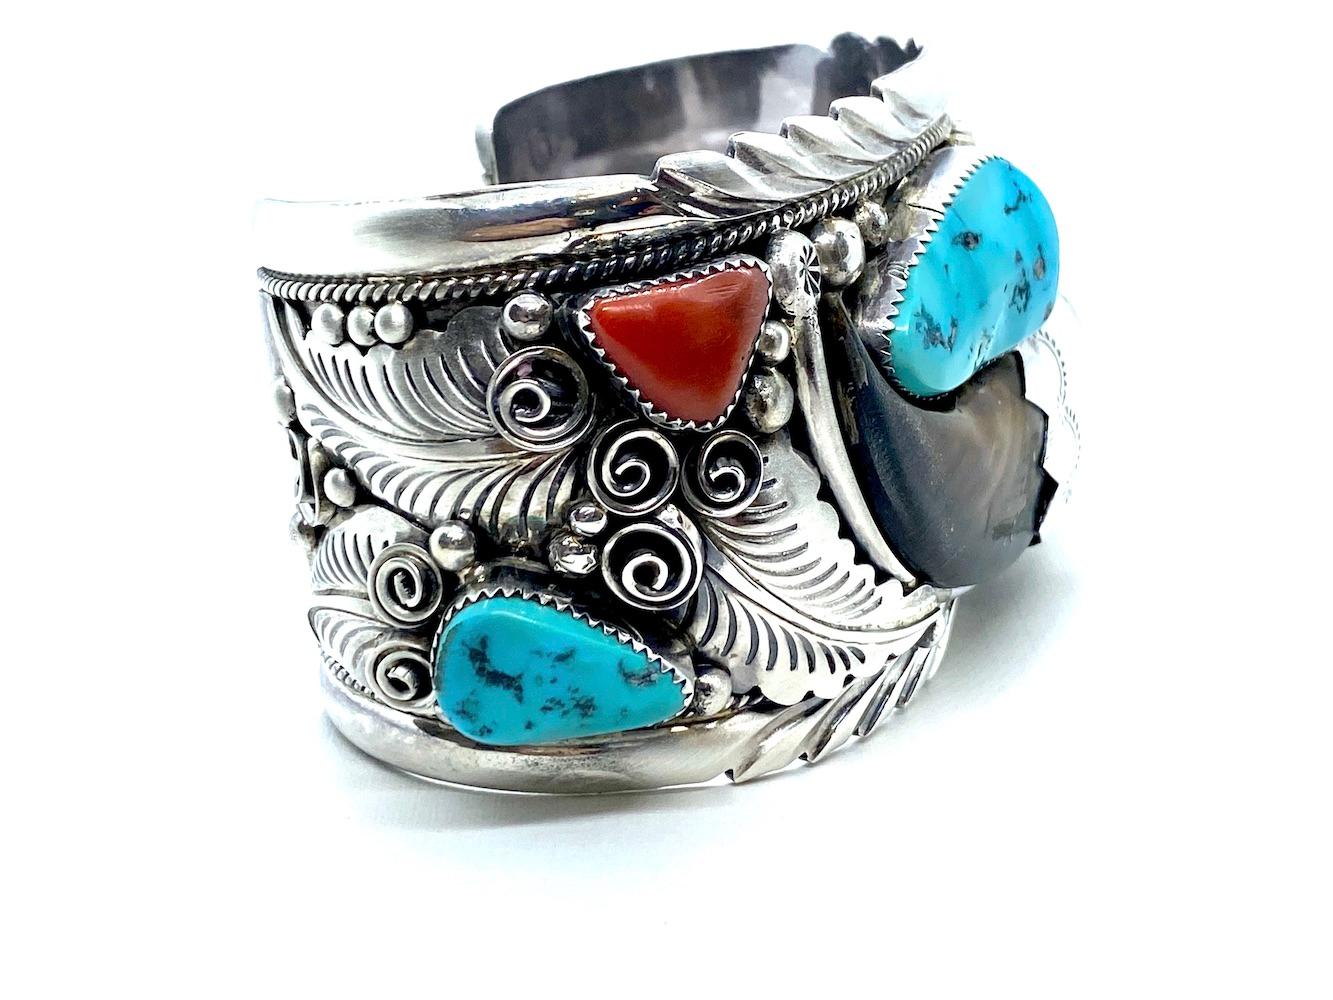 Antique Cushion Cut JW Toadlena Native American Bear Cuff Bracelet with Turquoise and Coral 4.12 Oz